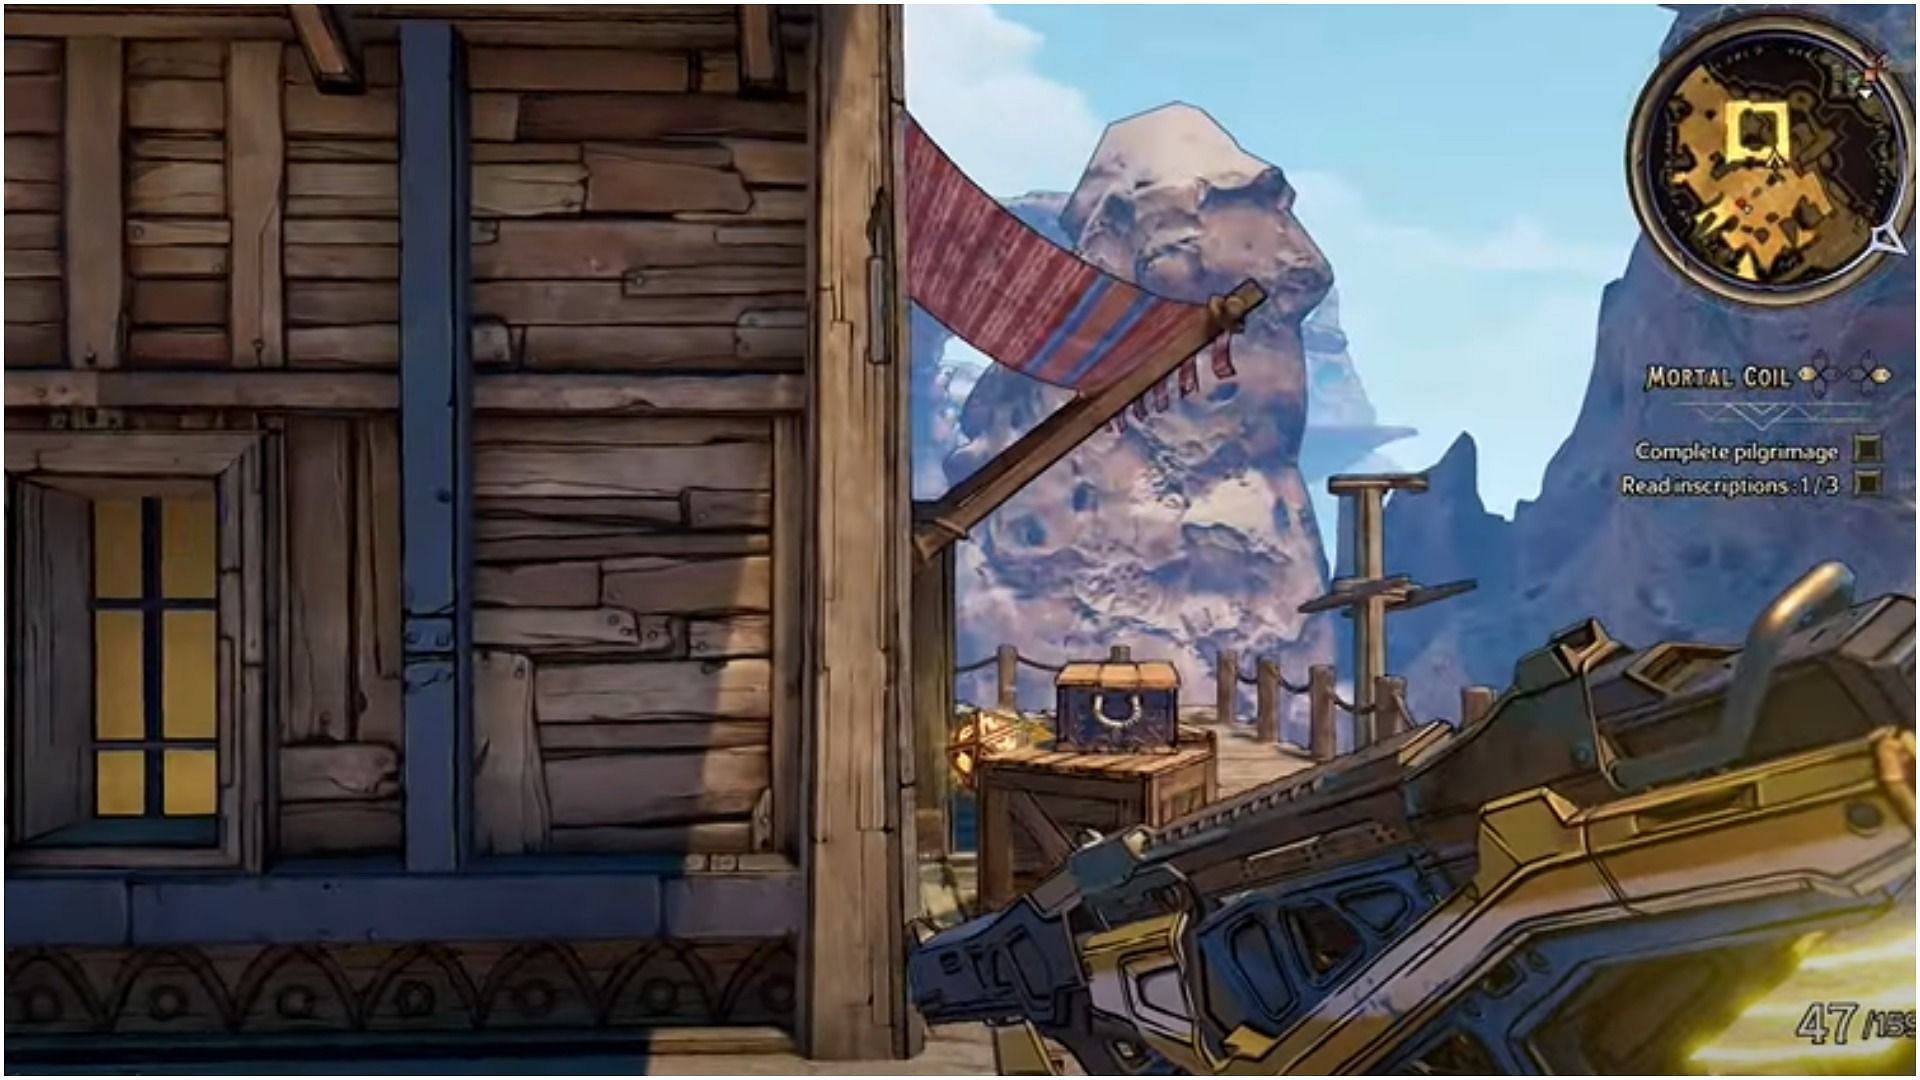 Players should continue up the slope until they reach the region with multiple pirate shacks (Image via YouTube/100% Guides)